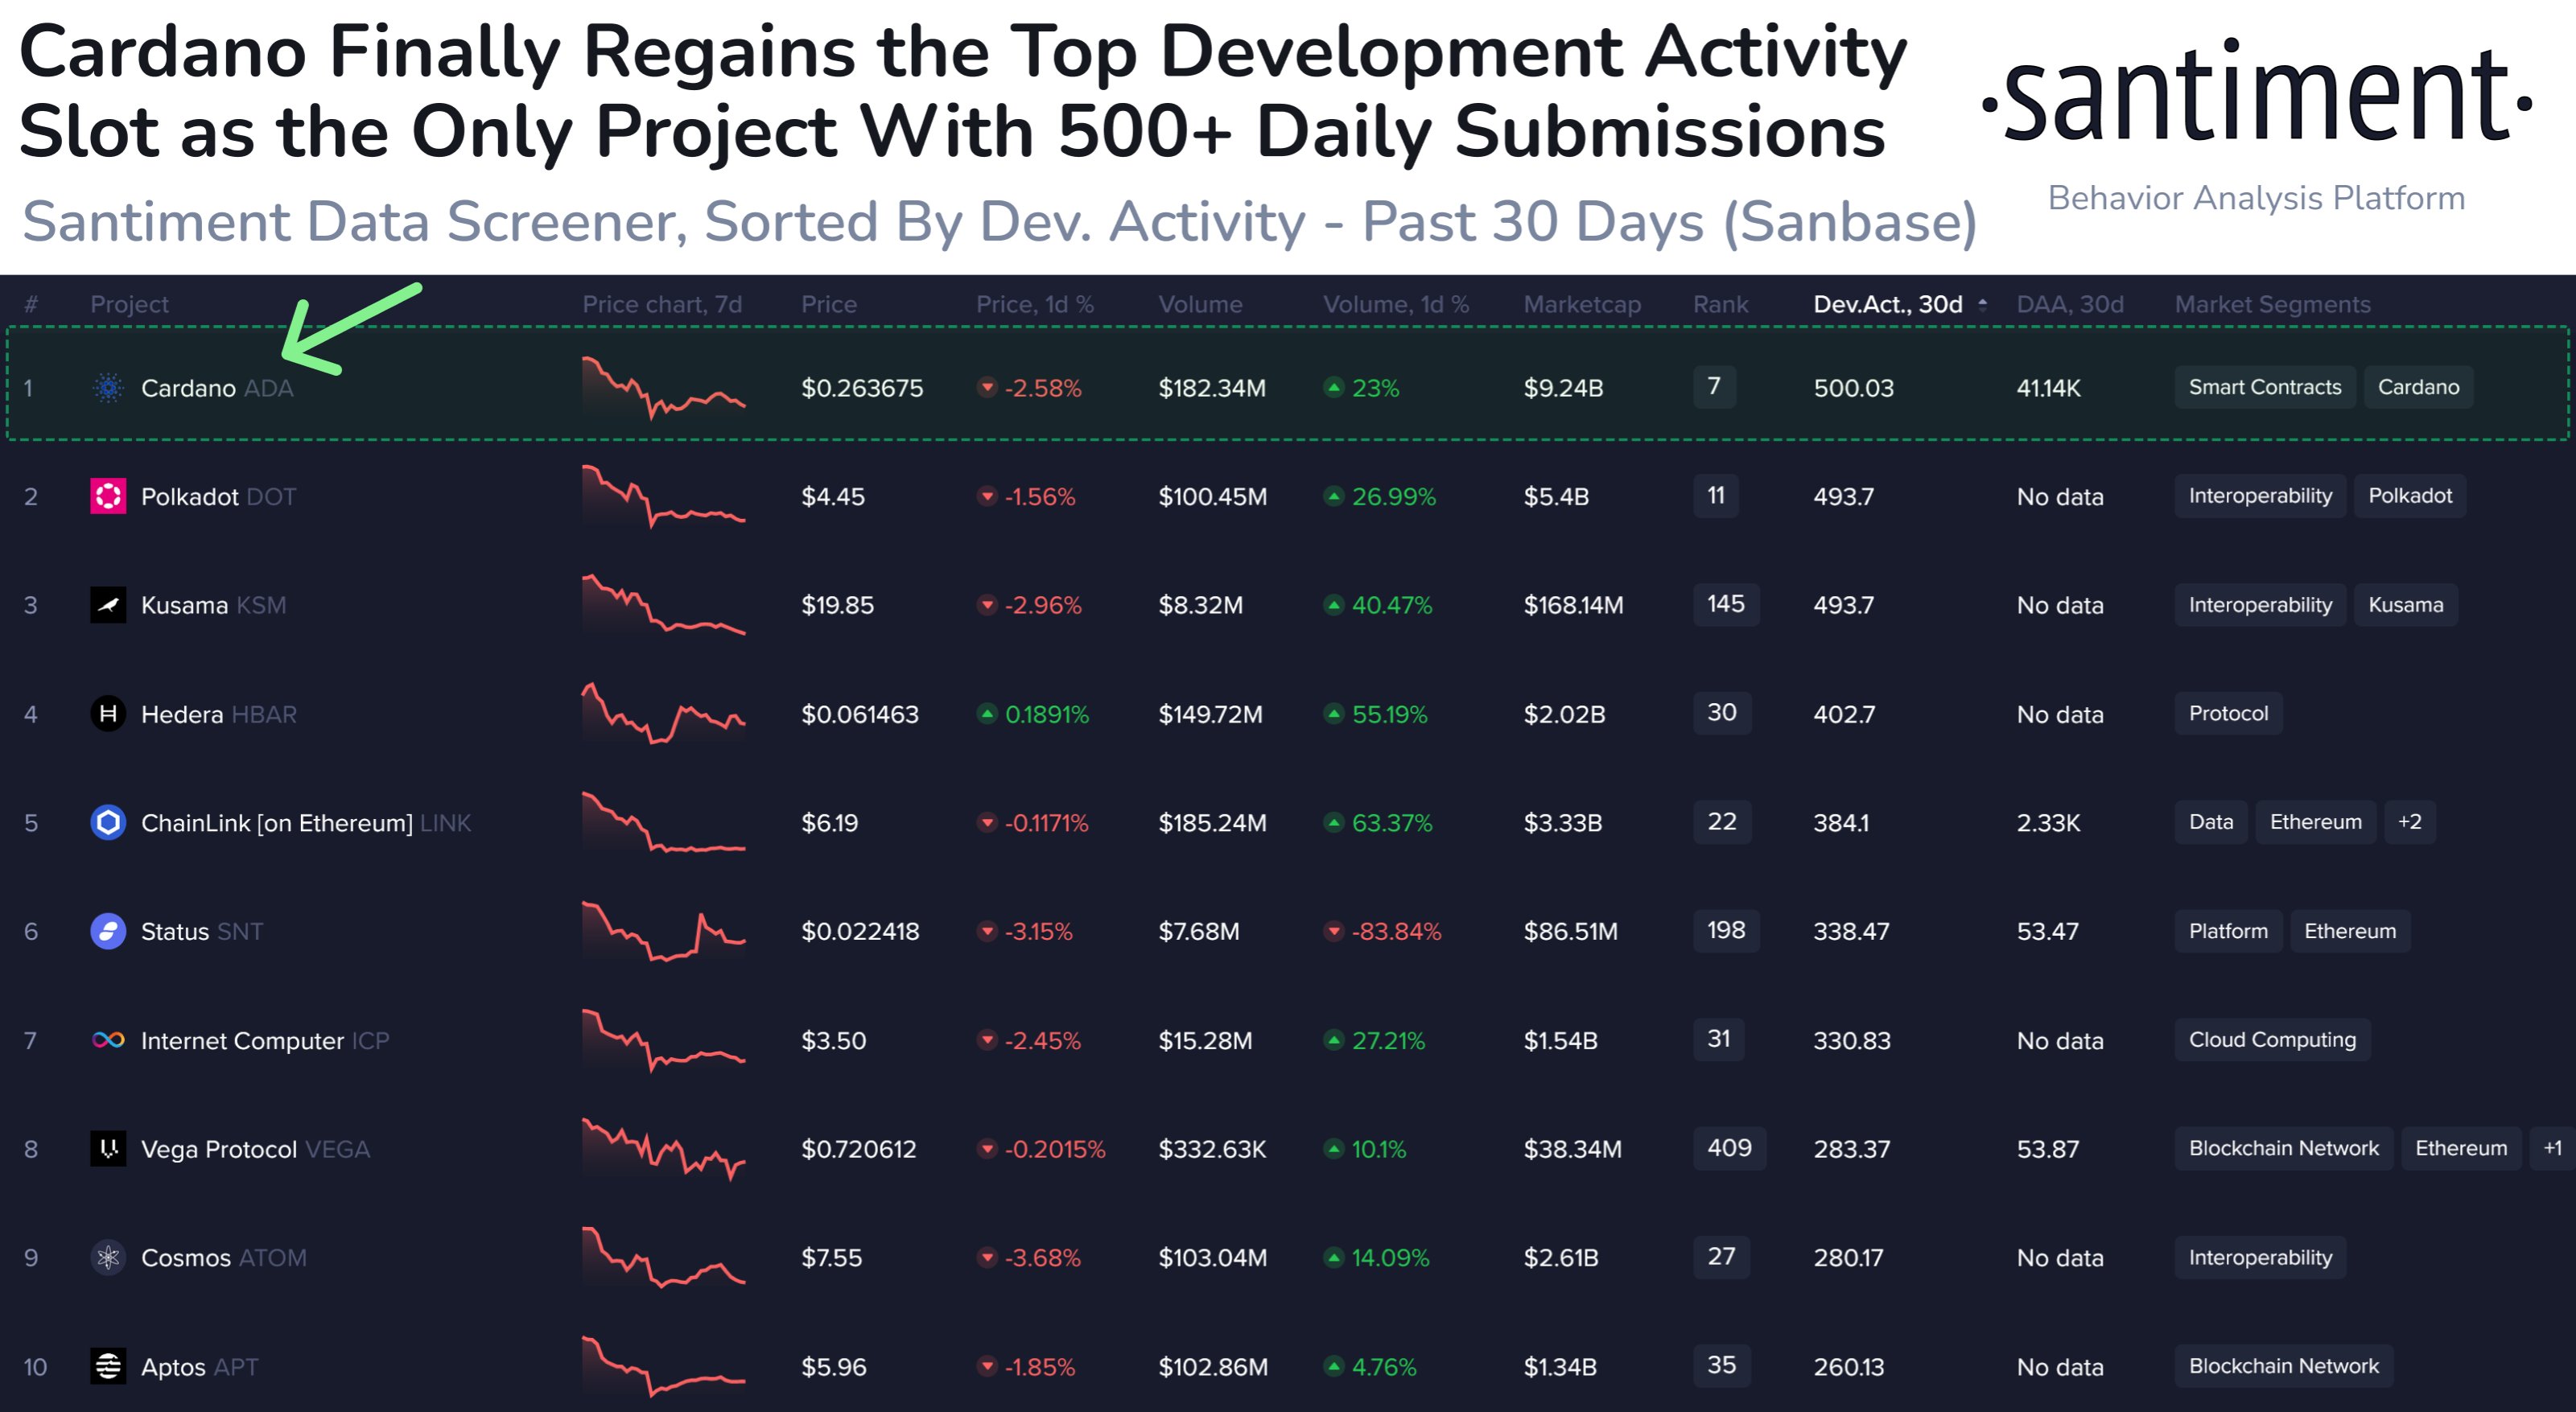 Cardano ranks first in development activity, as recorded by Santiment